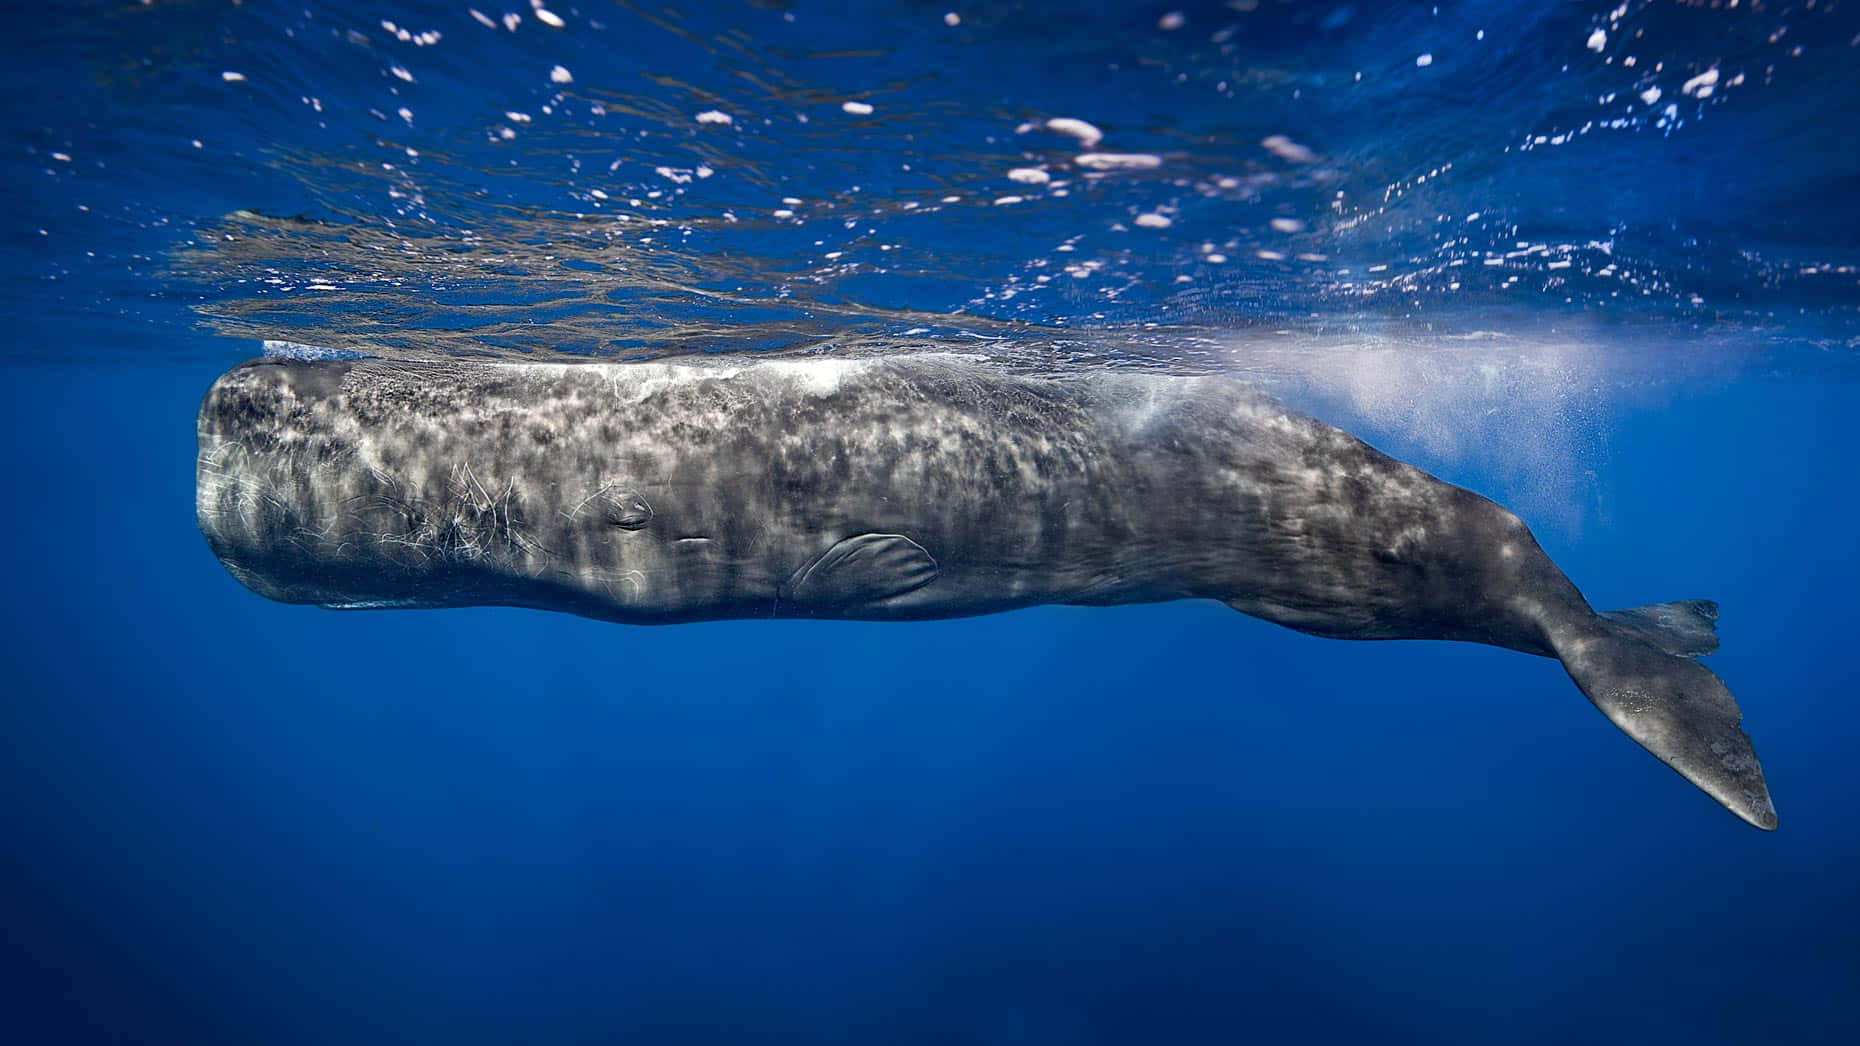 A Whale Swimming In The Ocean